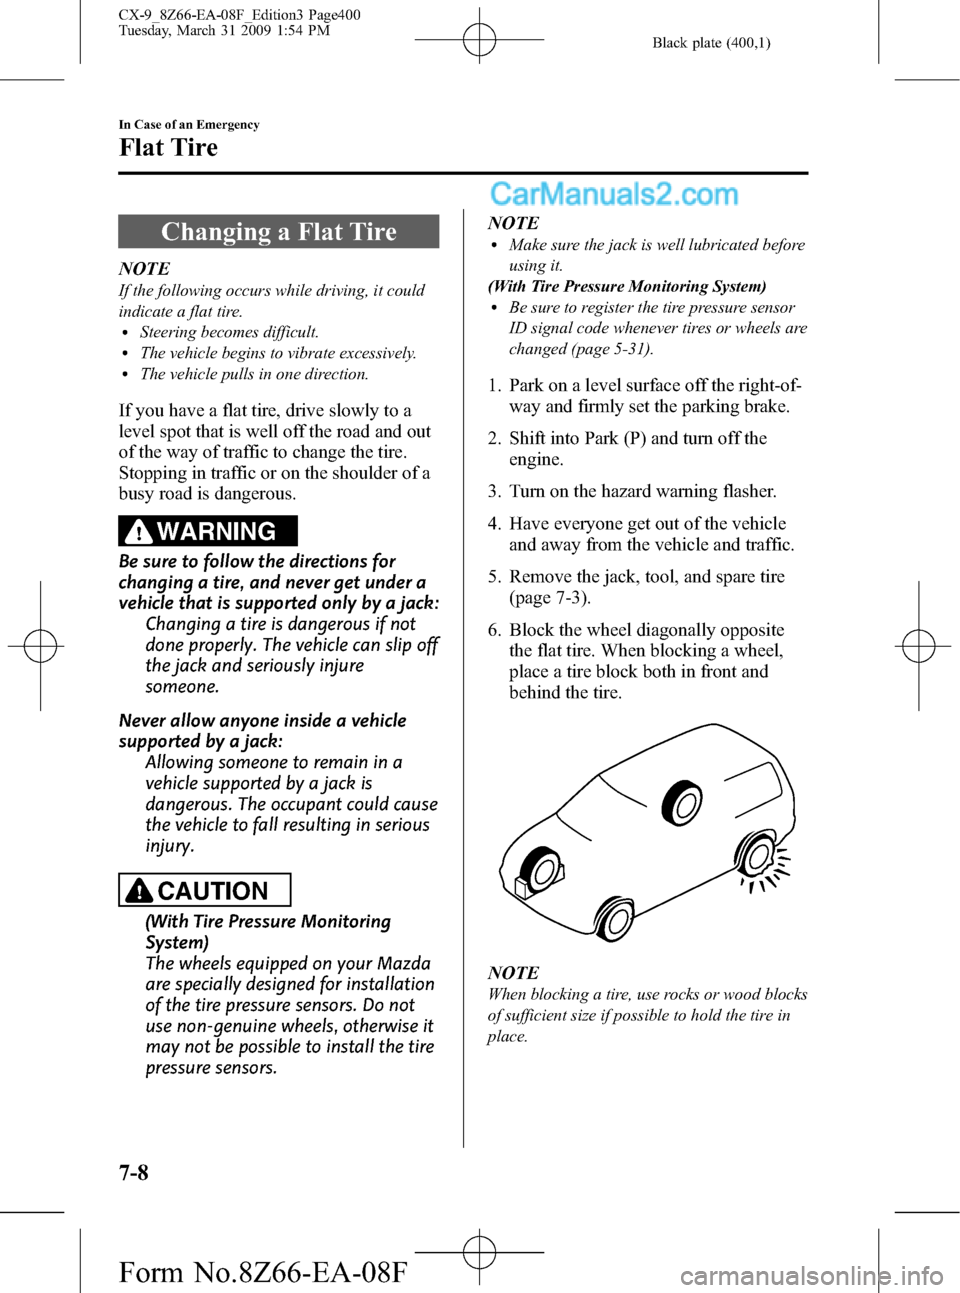 MAZDA MODEL CX-9 2009  Owners Manual (in English) Black plate (400,1)
Changing a Flat Tire
NOTE
If the following occurs while driving, it could
indicate a flat tire.
lSteering becomes difficult.lThe vehicle begins to vibrate excessively.lThe vehicle 